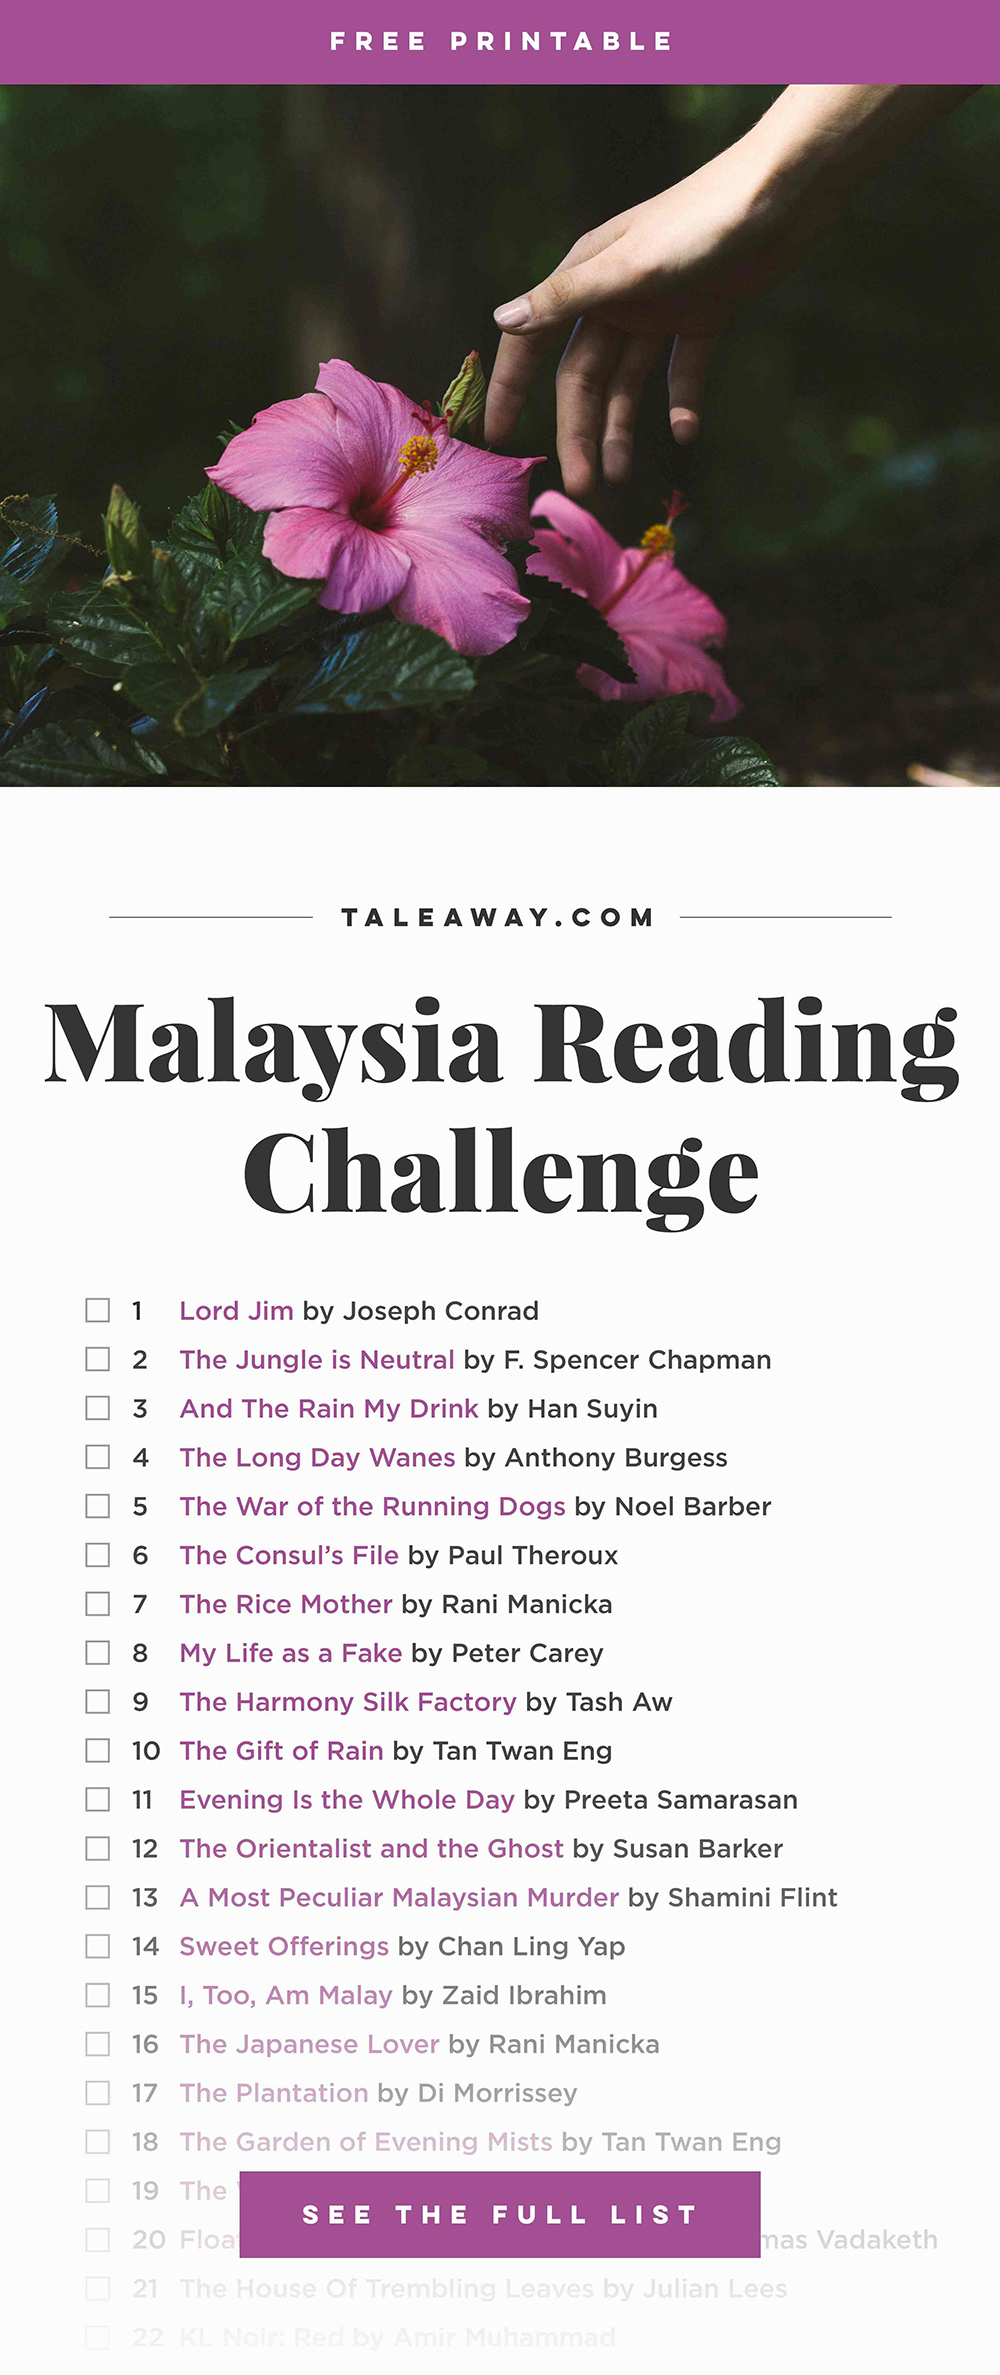 Malaysia Reading Challenge, Books Set In Malaysia - For more books visit www.taleway.com to find books set around the world. reading challenge, malaysian books, malaysia books, book challenge, books you must read, books from around the world, world books, books and travel, travel reading list, reading list, books around the world, books to read, malaysia books novels, malaysia travel